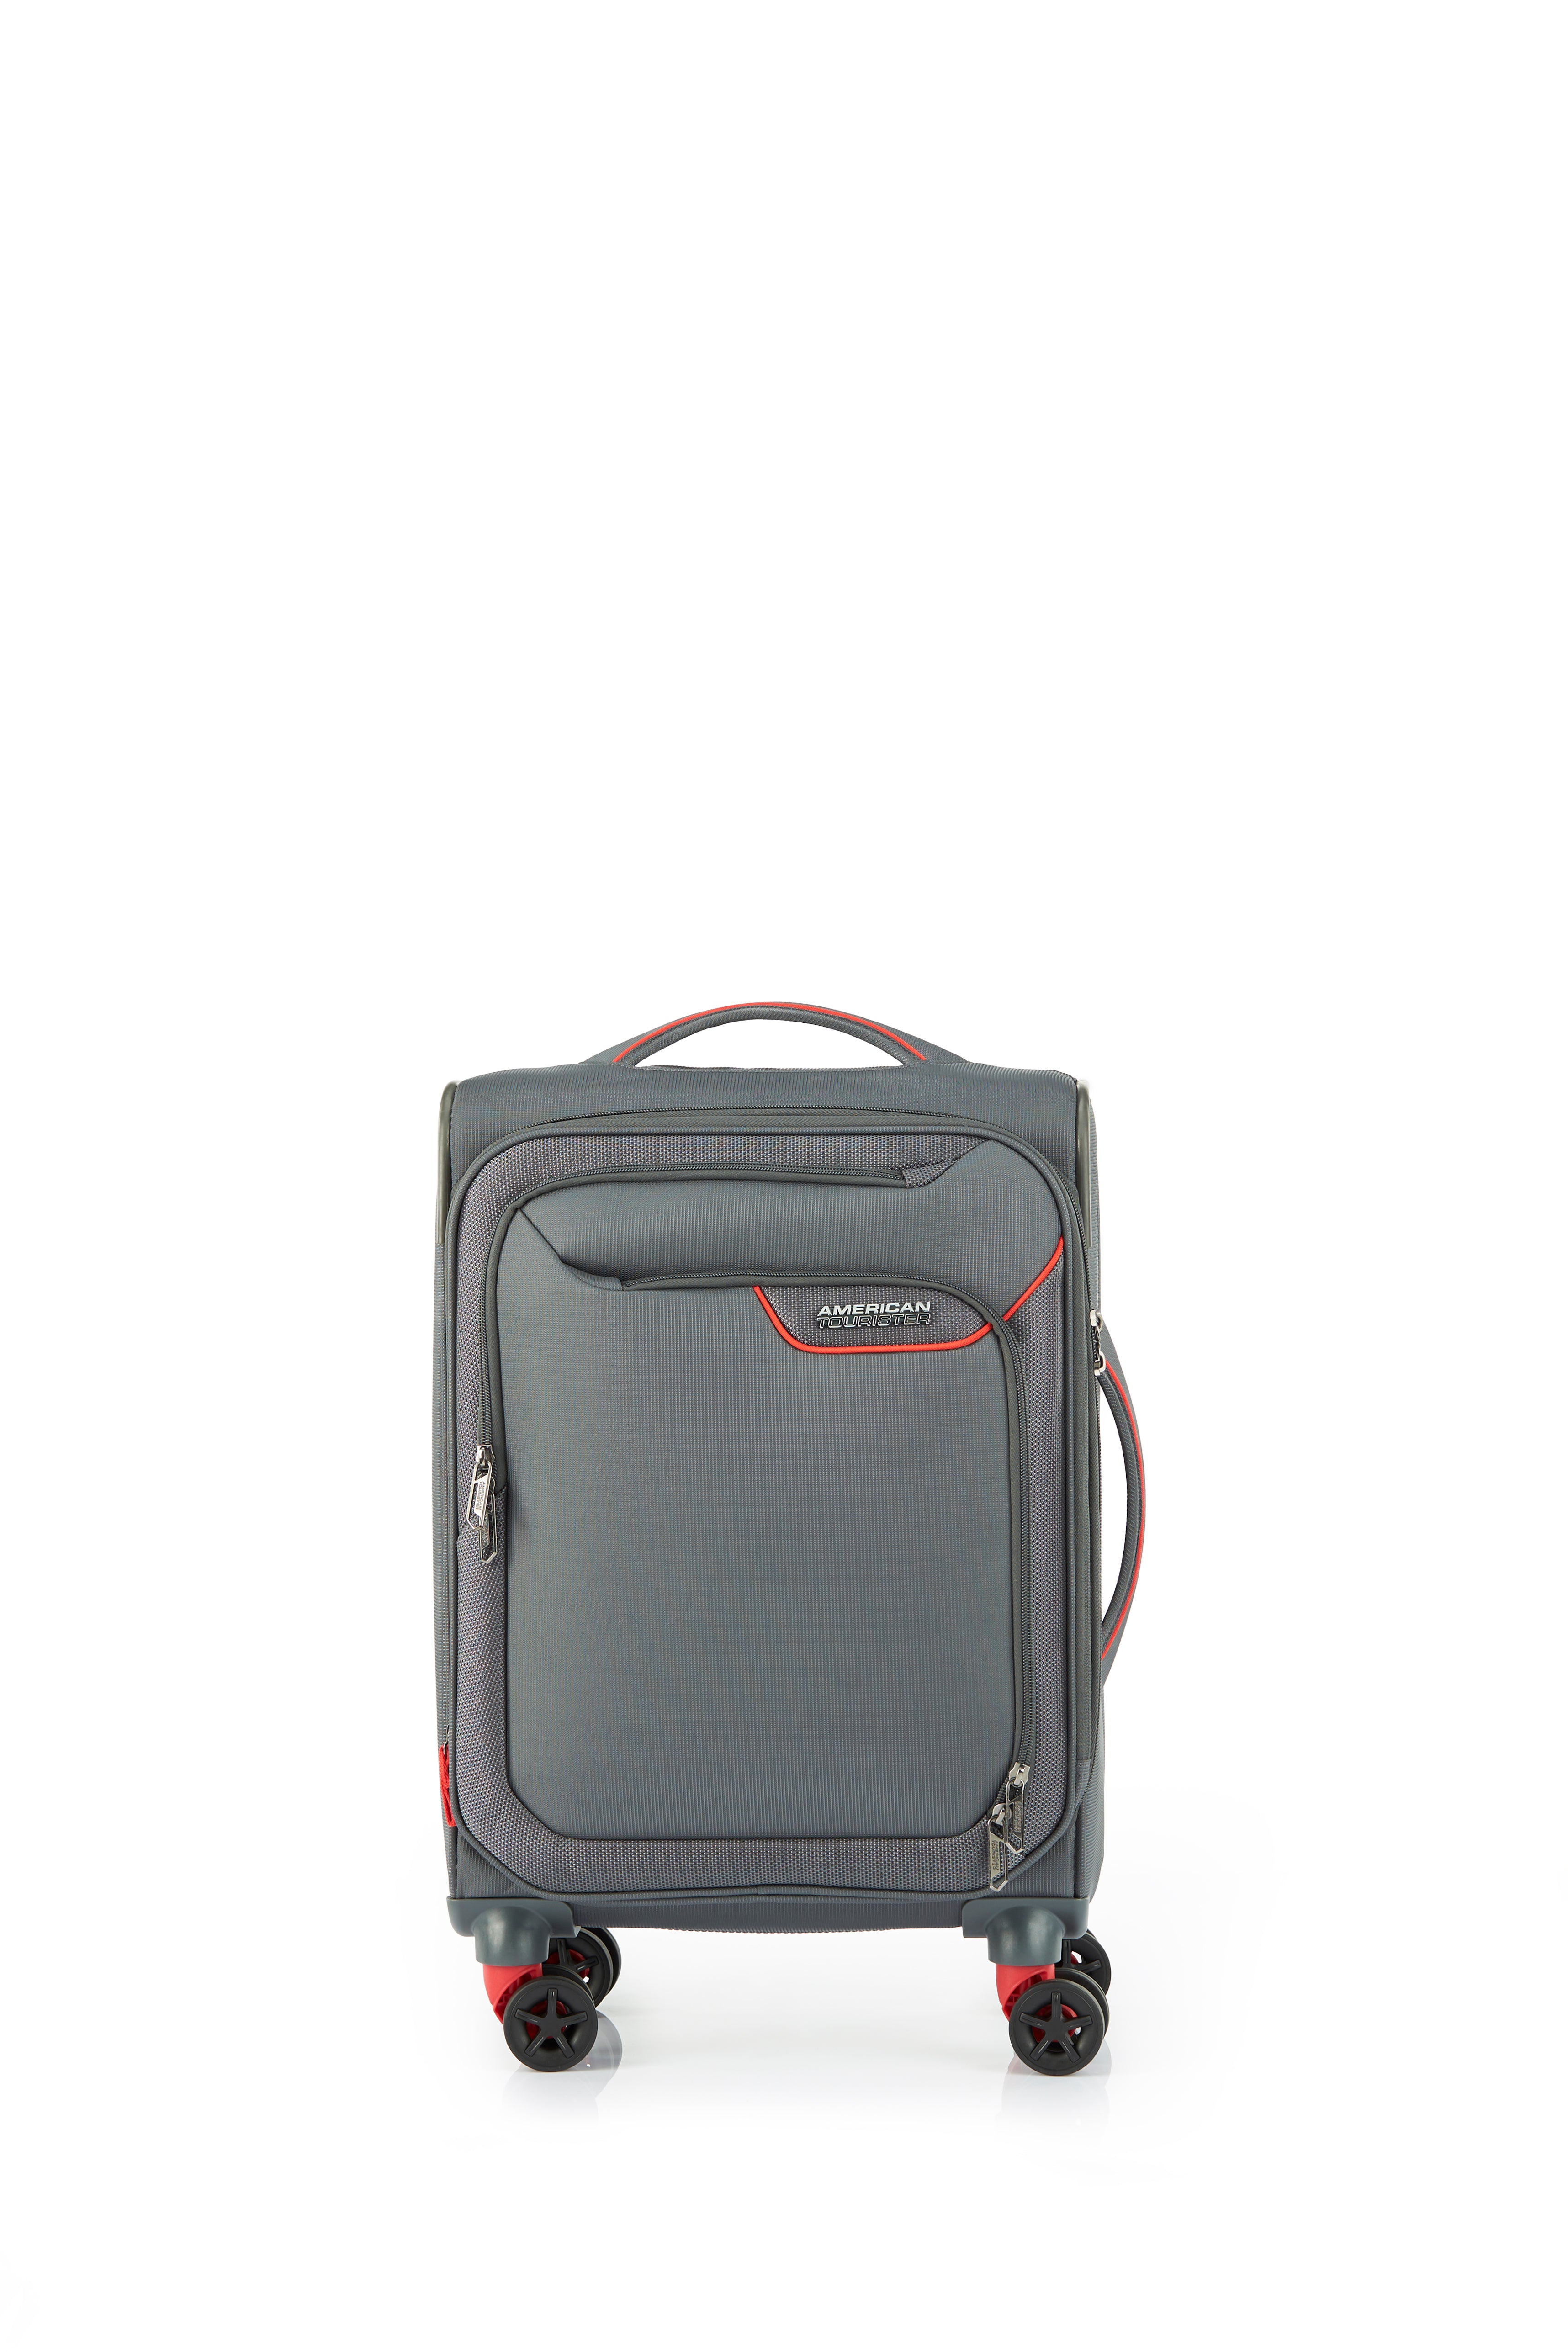 American Tourister - Applite ECO 55cm Small Suitcase - Grey/Red-2